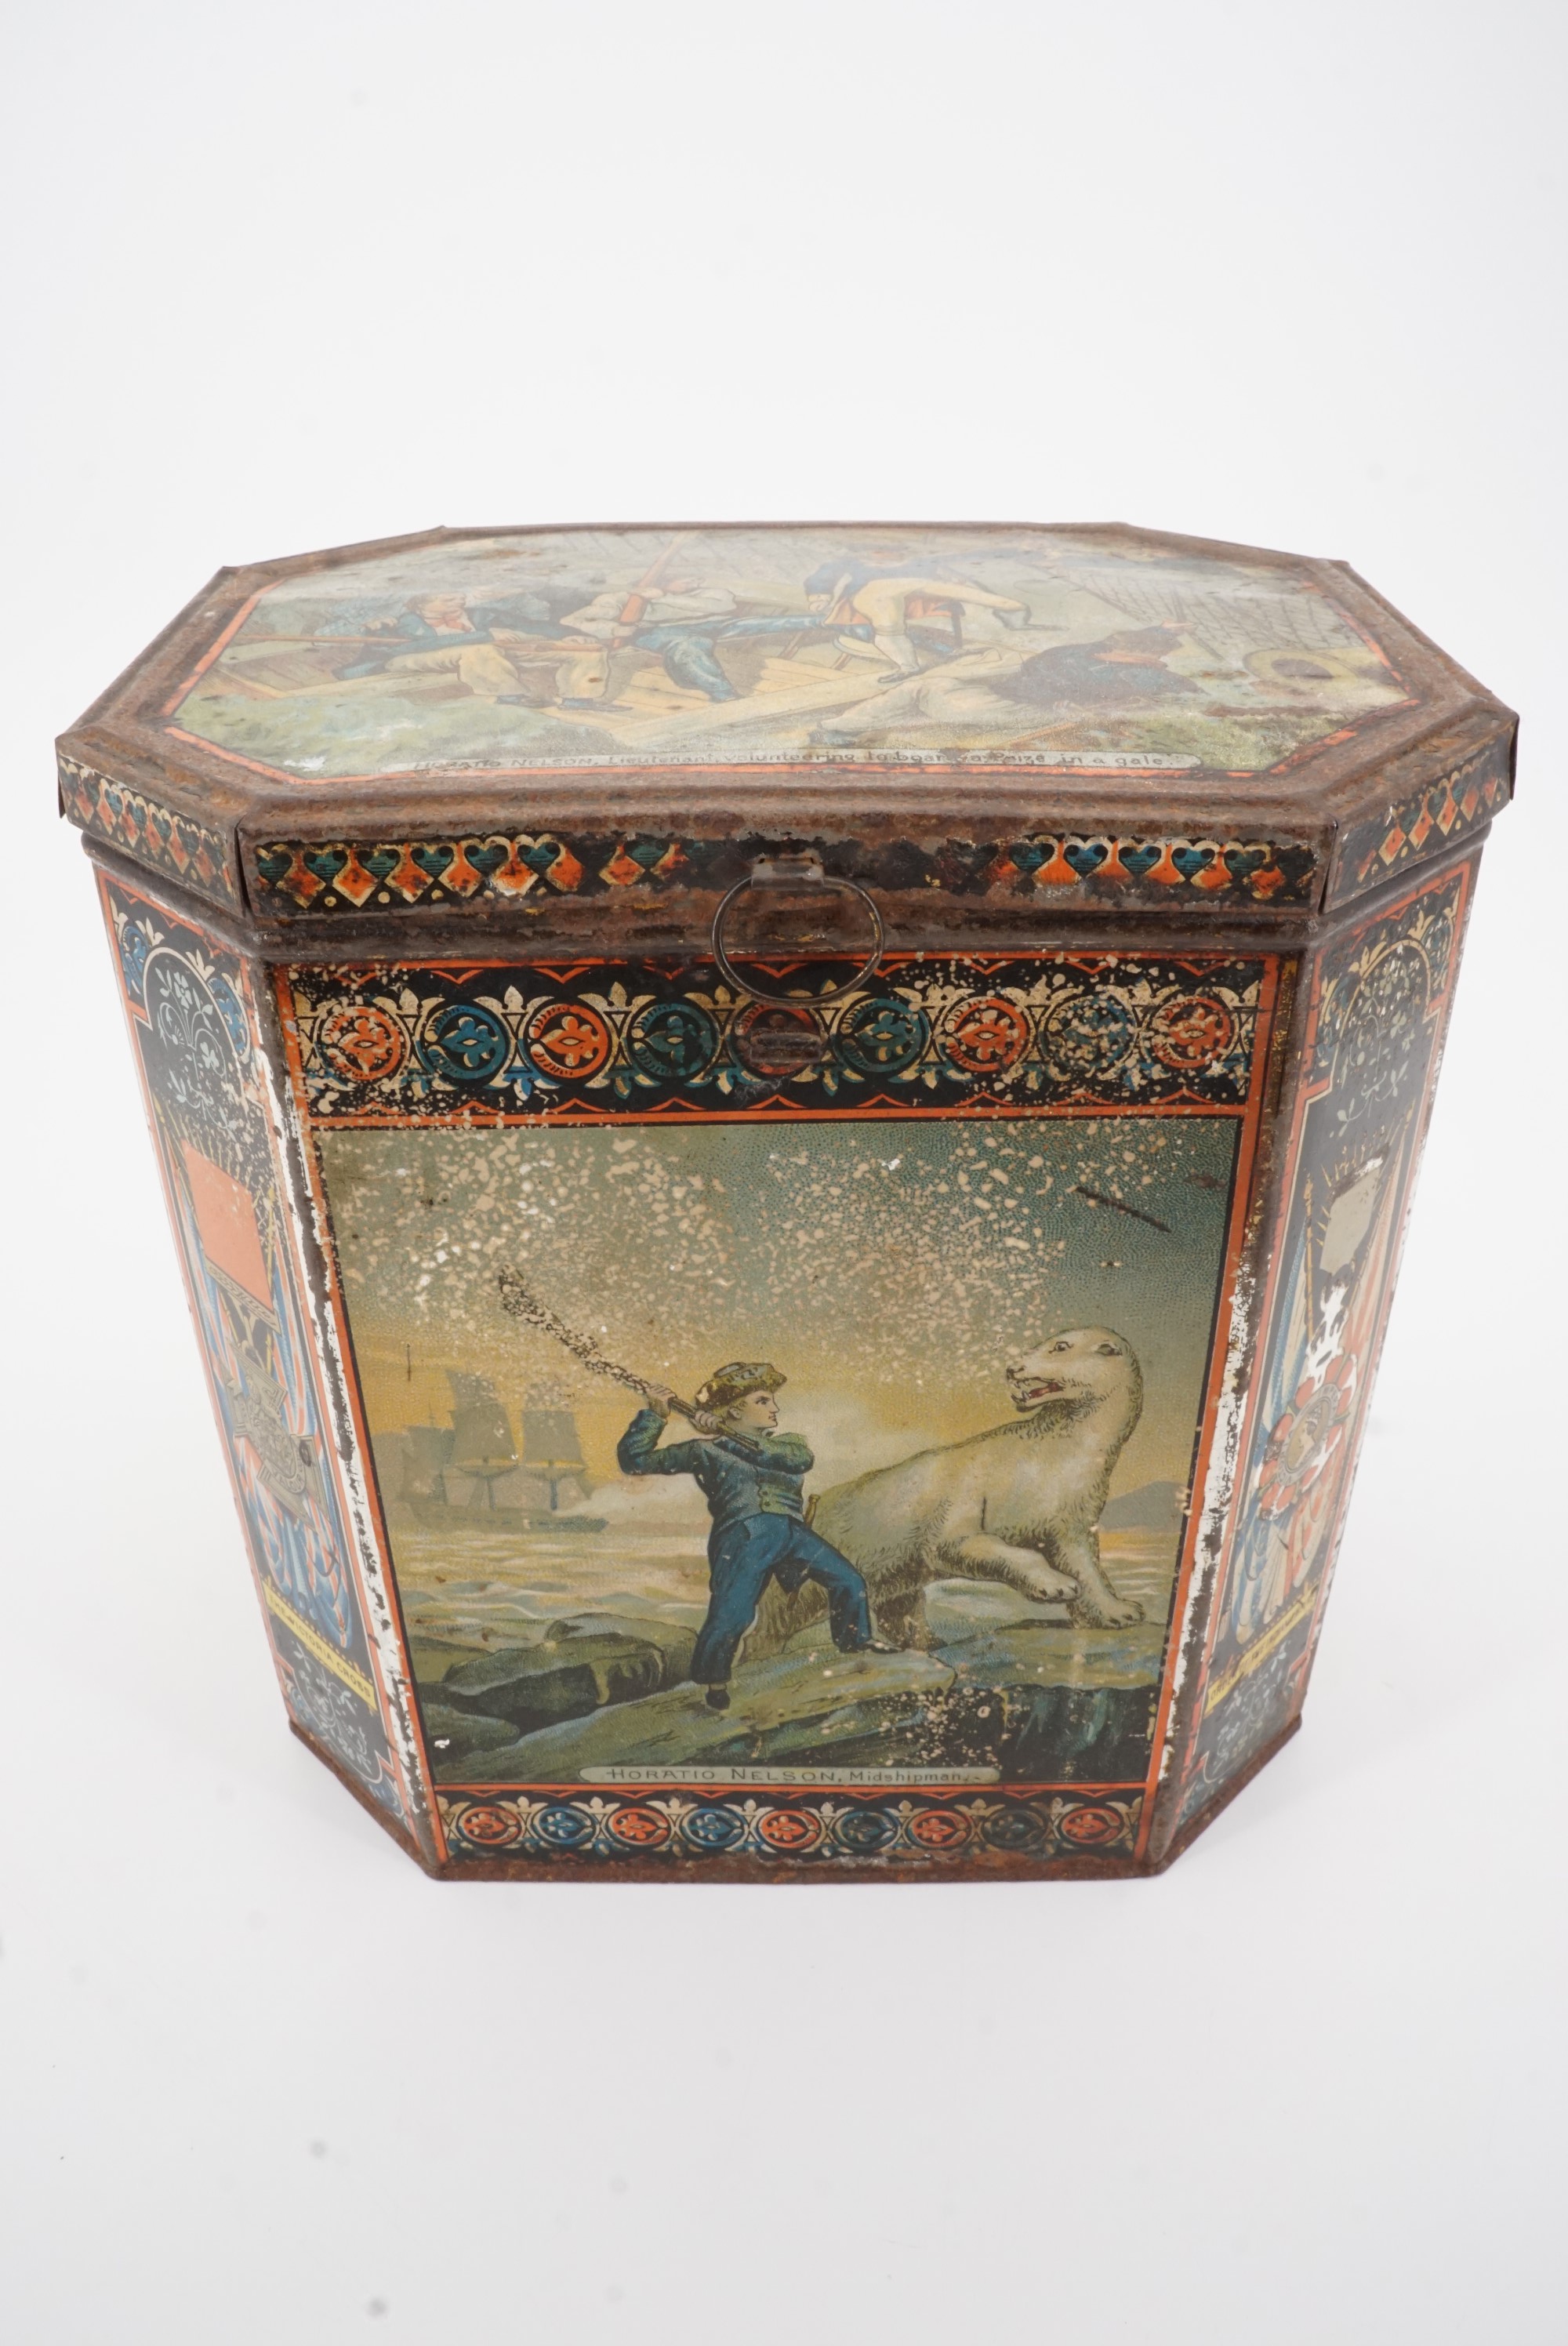 A Keen, Robinson & Co Keen's Mustard advertising tin lithograph decorated with scenes from Admiral - Image 2 of 2